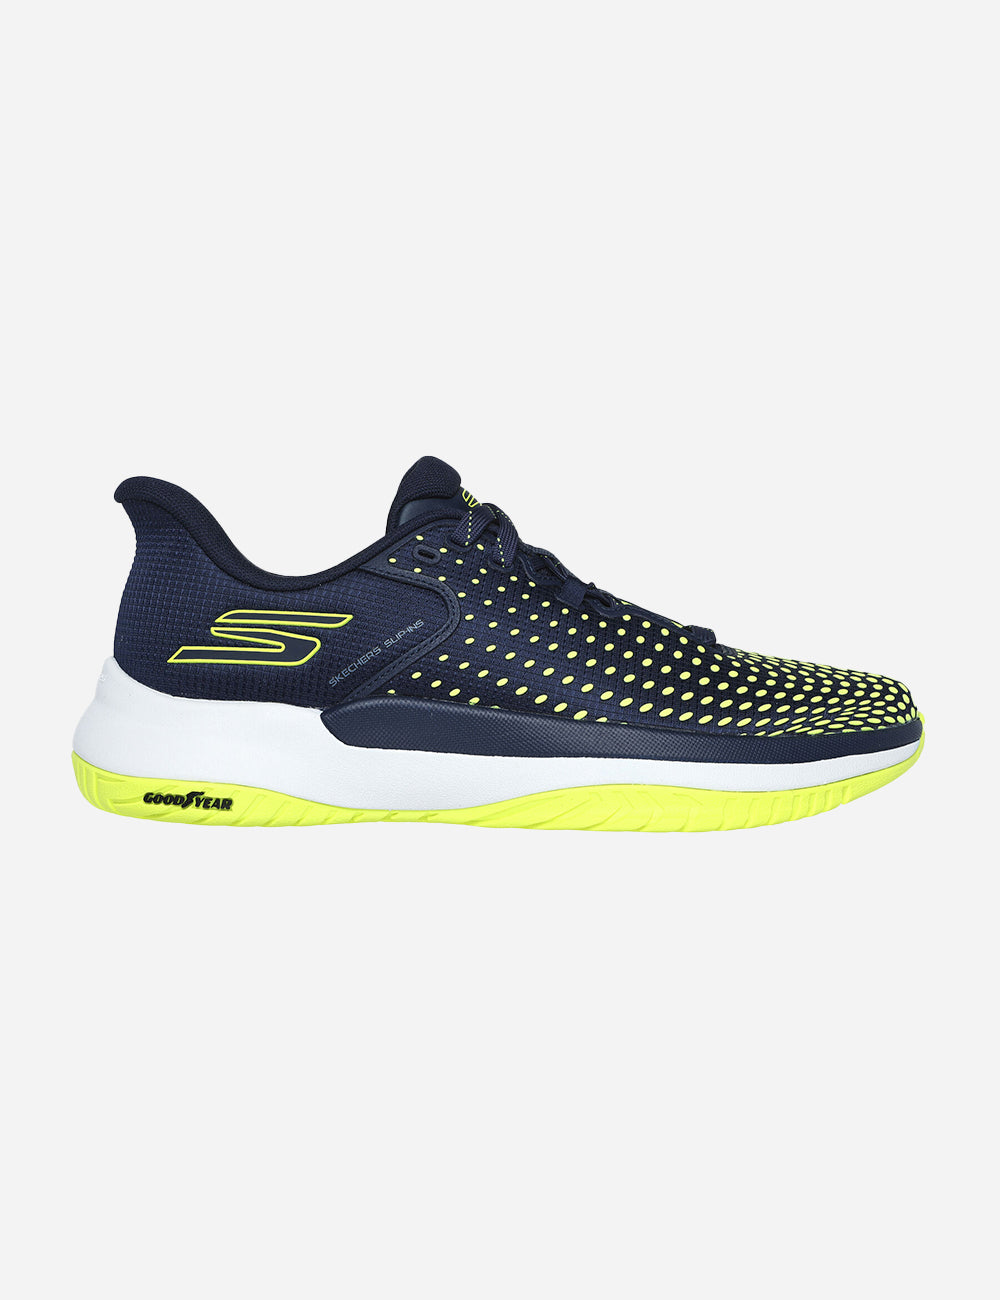 Best Selling Pickleball Shoes